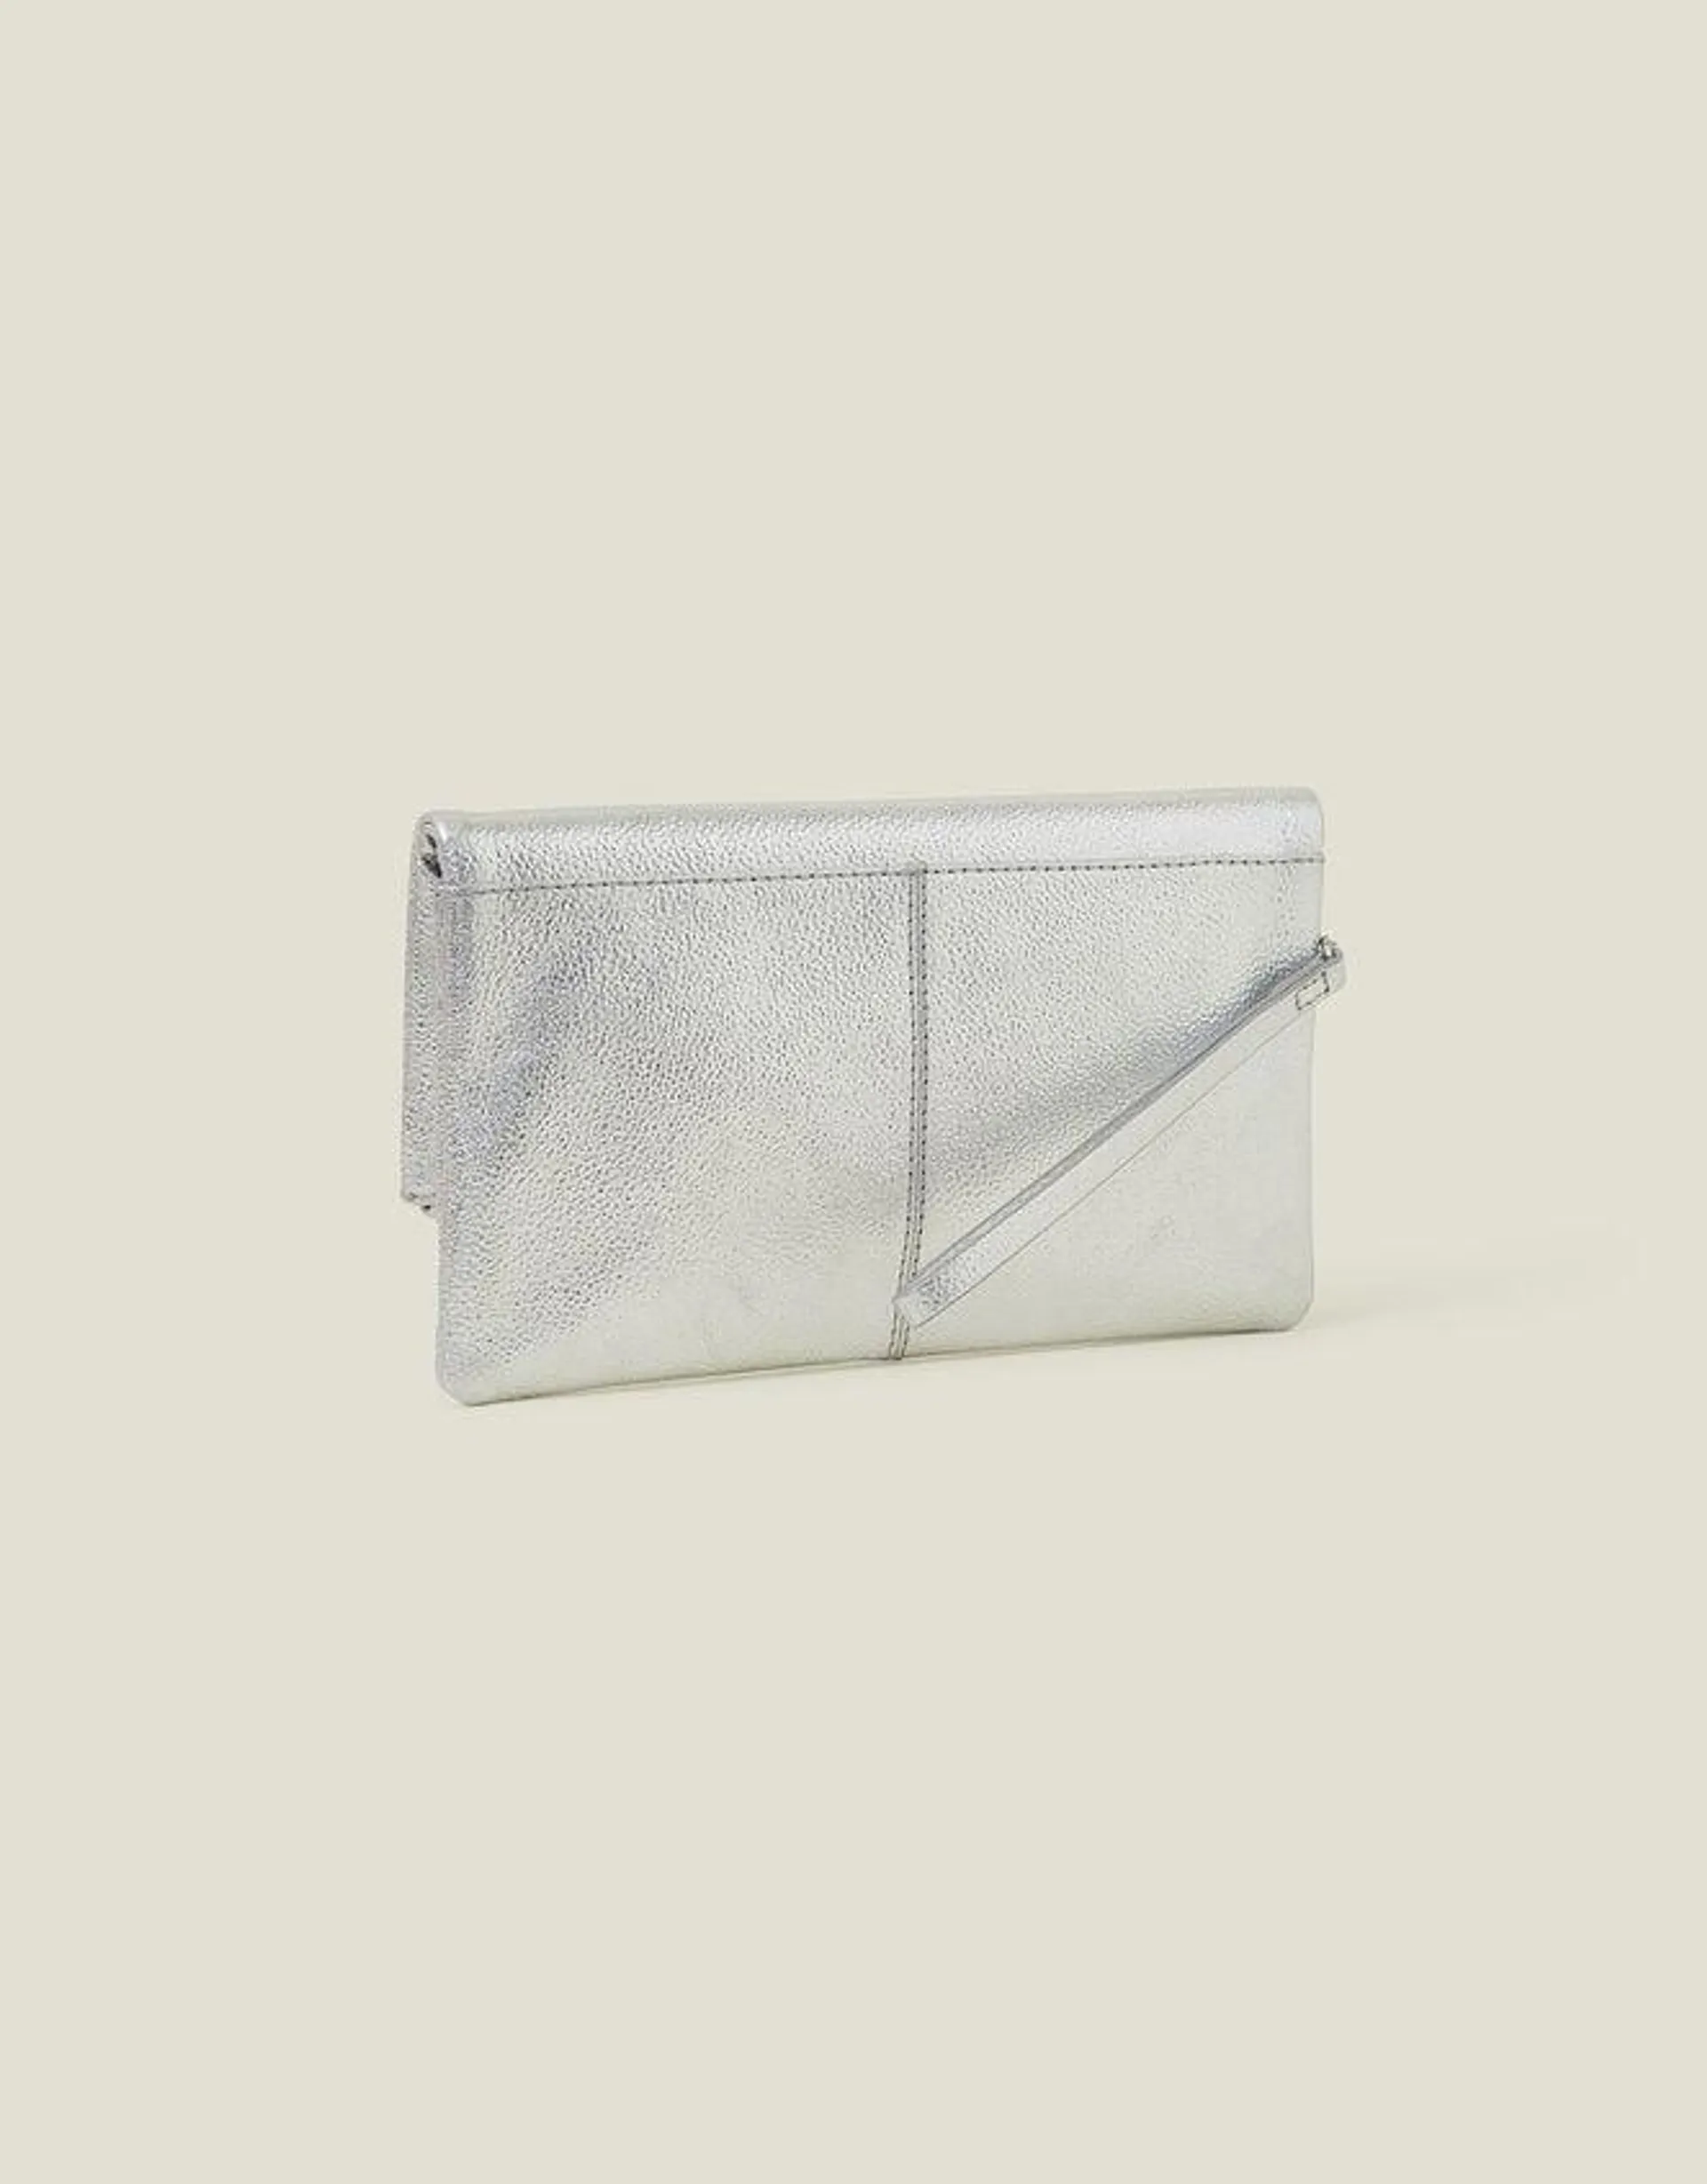 Leather Metallic Fold Over Clutch Silver